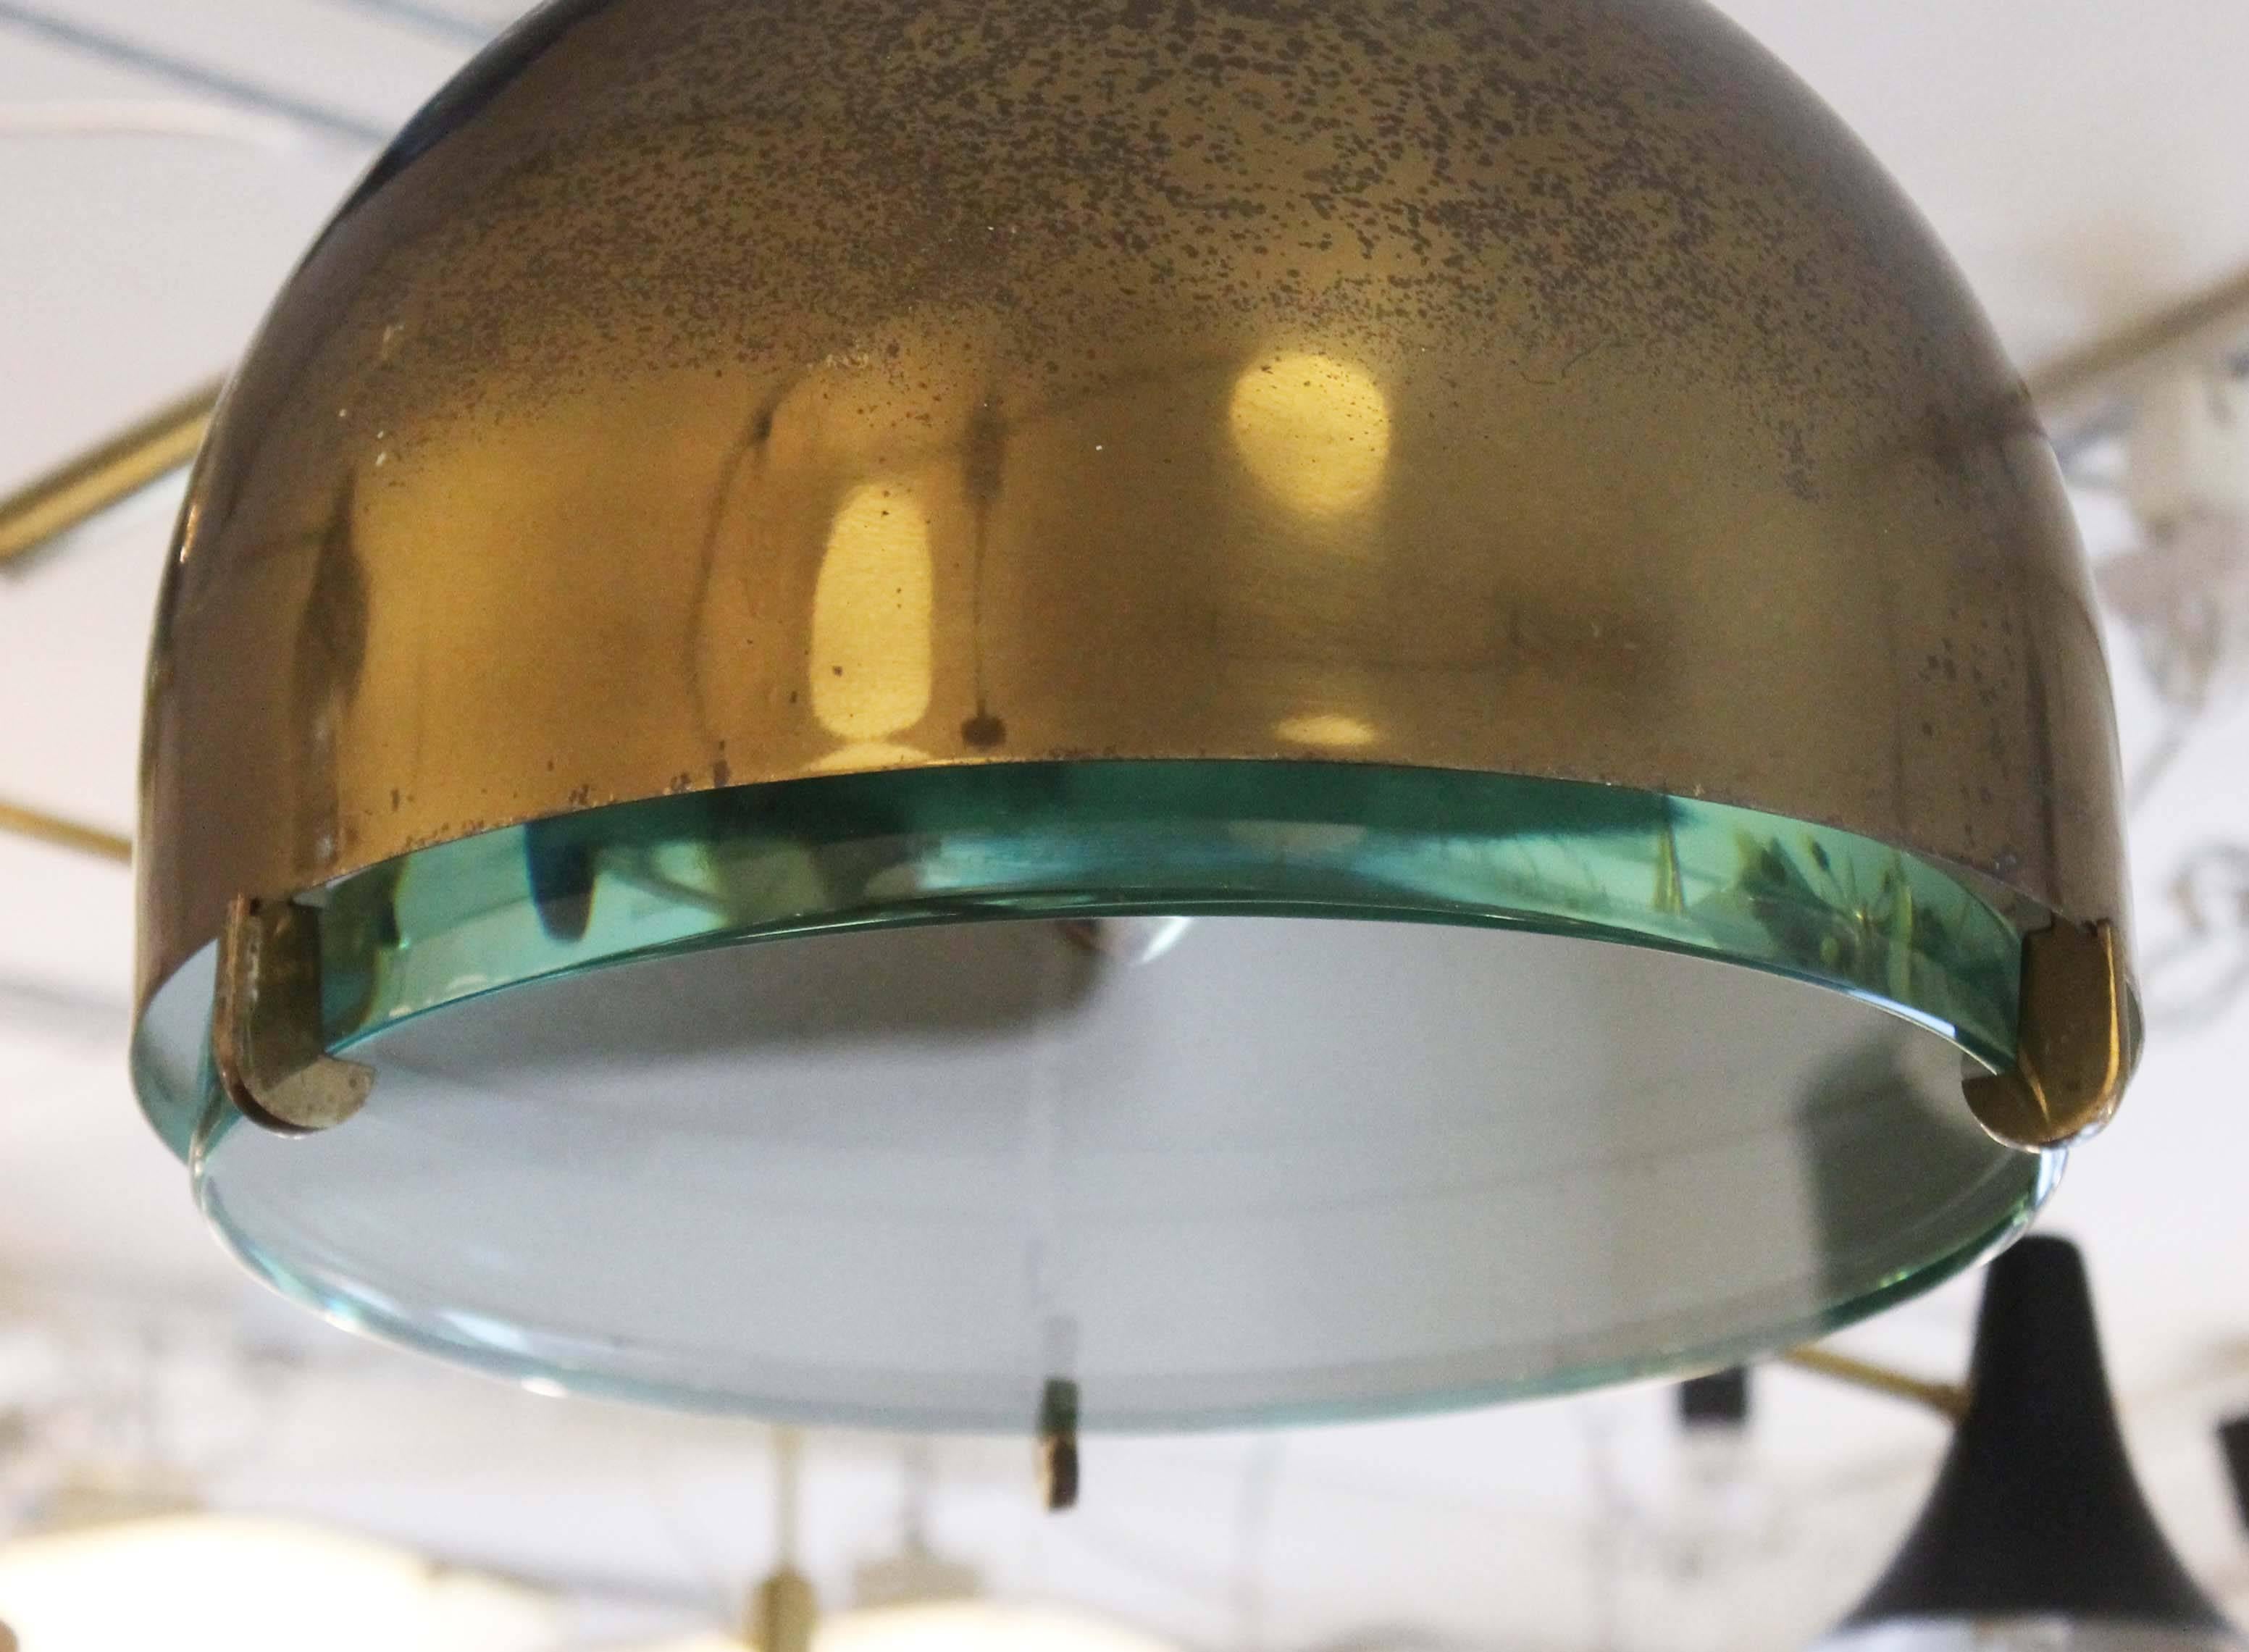 Beautiful and rare Fontana Arte pendant designed by Max Ingrand featuring a thick glass screen and patinated brass mounting. Height can be easily adjusted by shortening or tightening the electrical cord. Holds one regular Edison socket. The brass